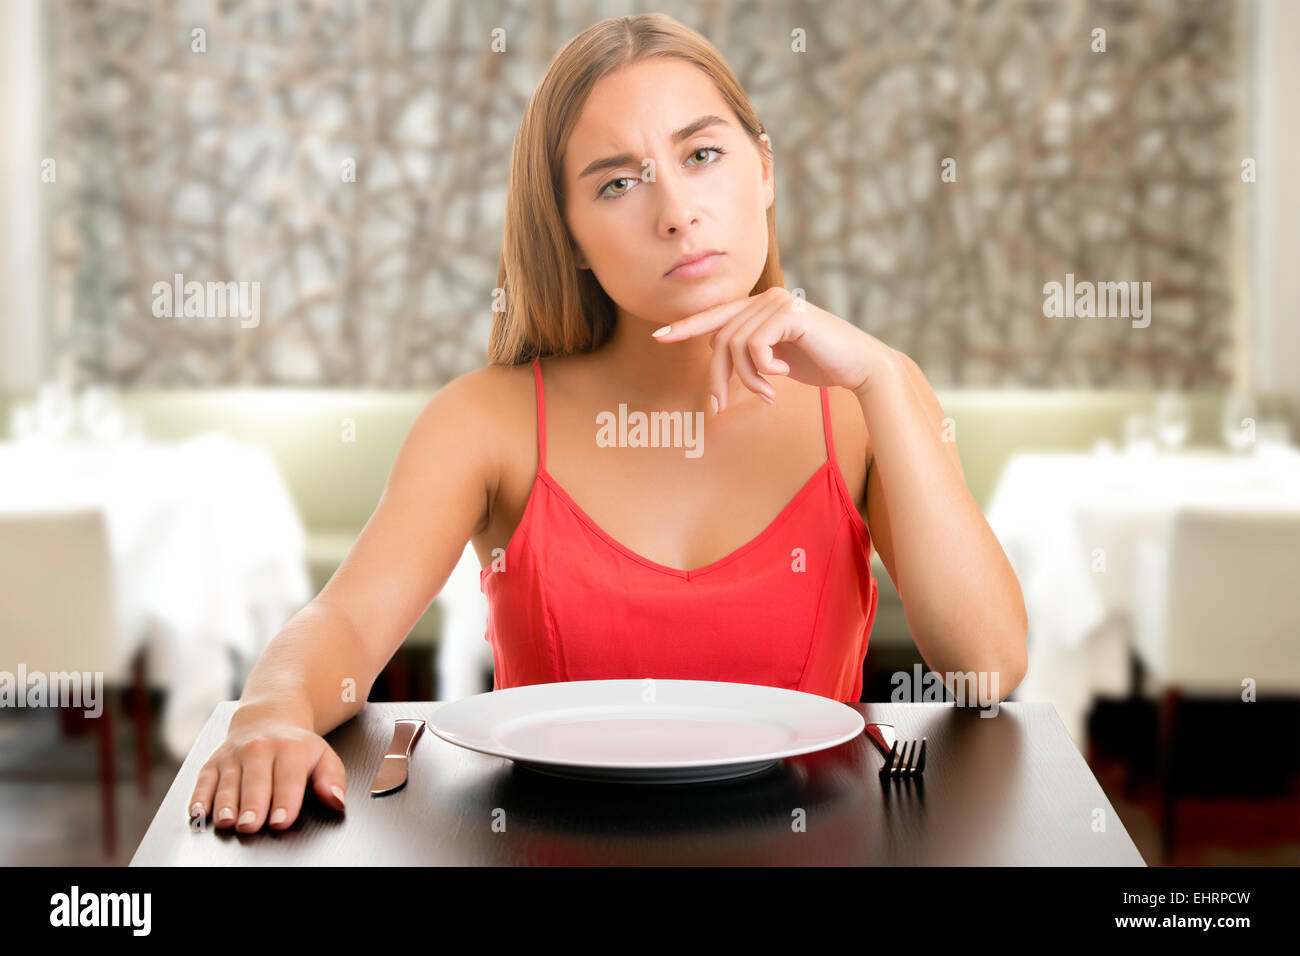 Hungry woman on a diet waiting with an empty plate in a restaurant Stock Photo